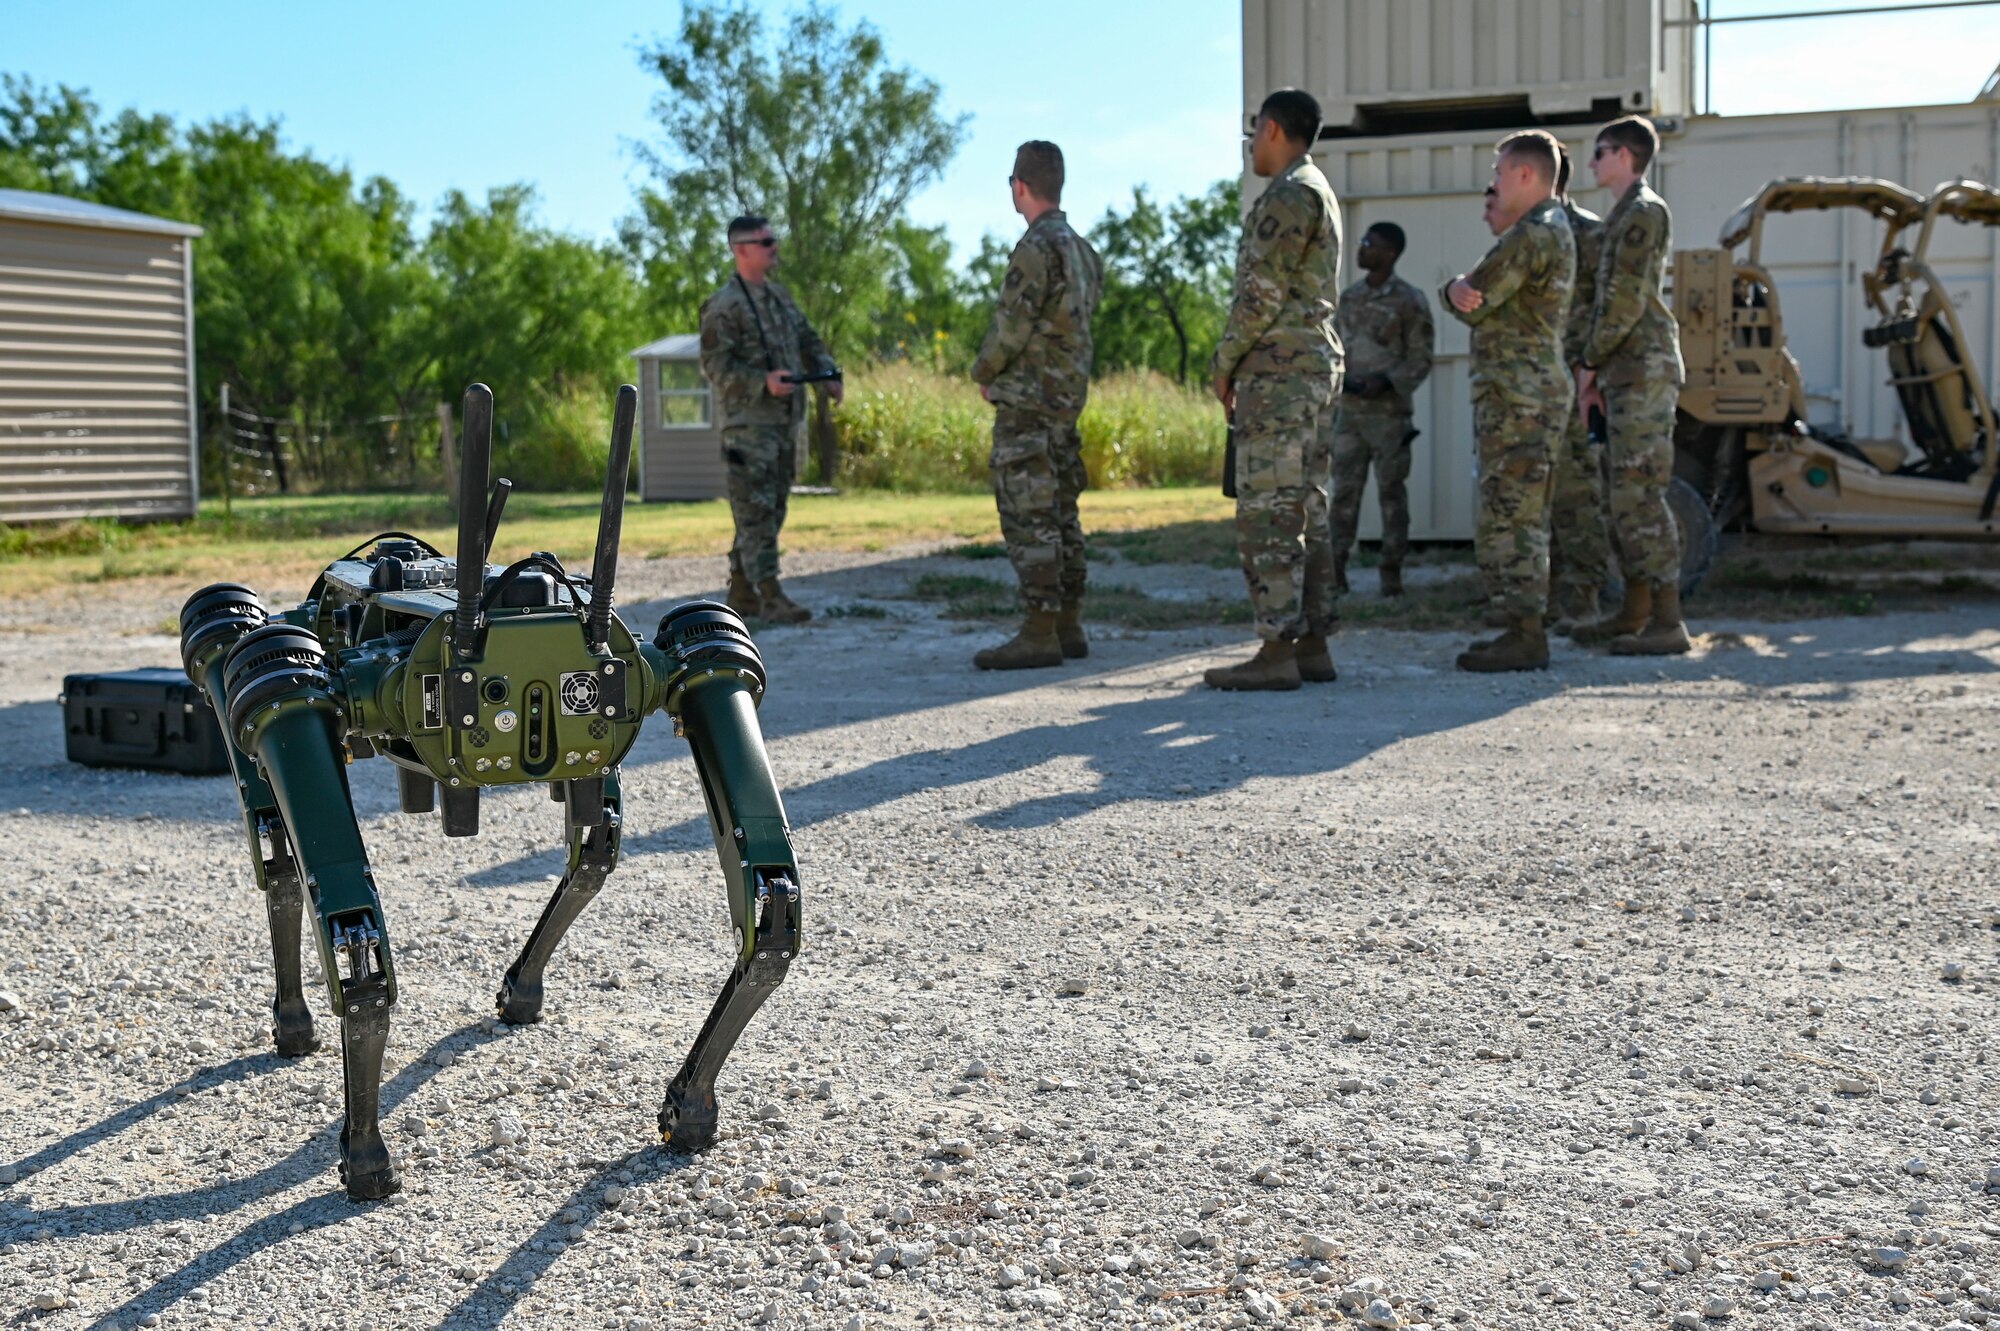 Personnel from the 7th Security Force Squadron demonstrate new technology for Air Force ROTC cadets during Project Tuskegee 2.0 at Dyess Air Force Base, Texas, Aug. 2, 2023. The project is intended to increase the cadets' understanding of Air Force and Space Force missions and day-to-day operations. The 19 cadets in attendance represent 19 different Air Force ROTC detachments across the enterprise's four regions. (U.S. Air Force photo by Airman 1st Class Emma Anderson)